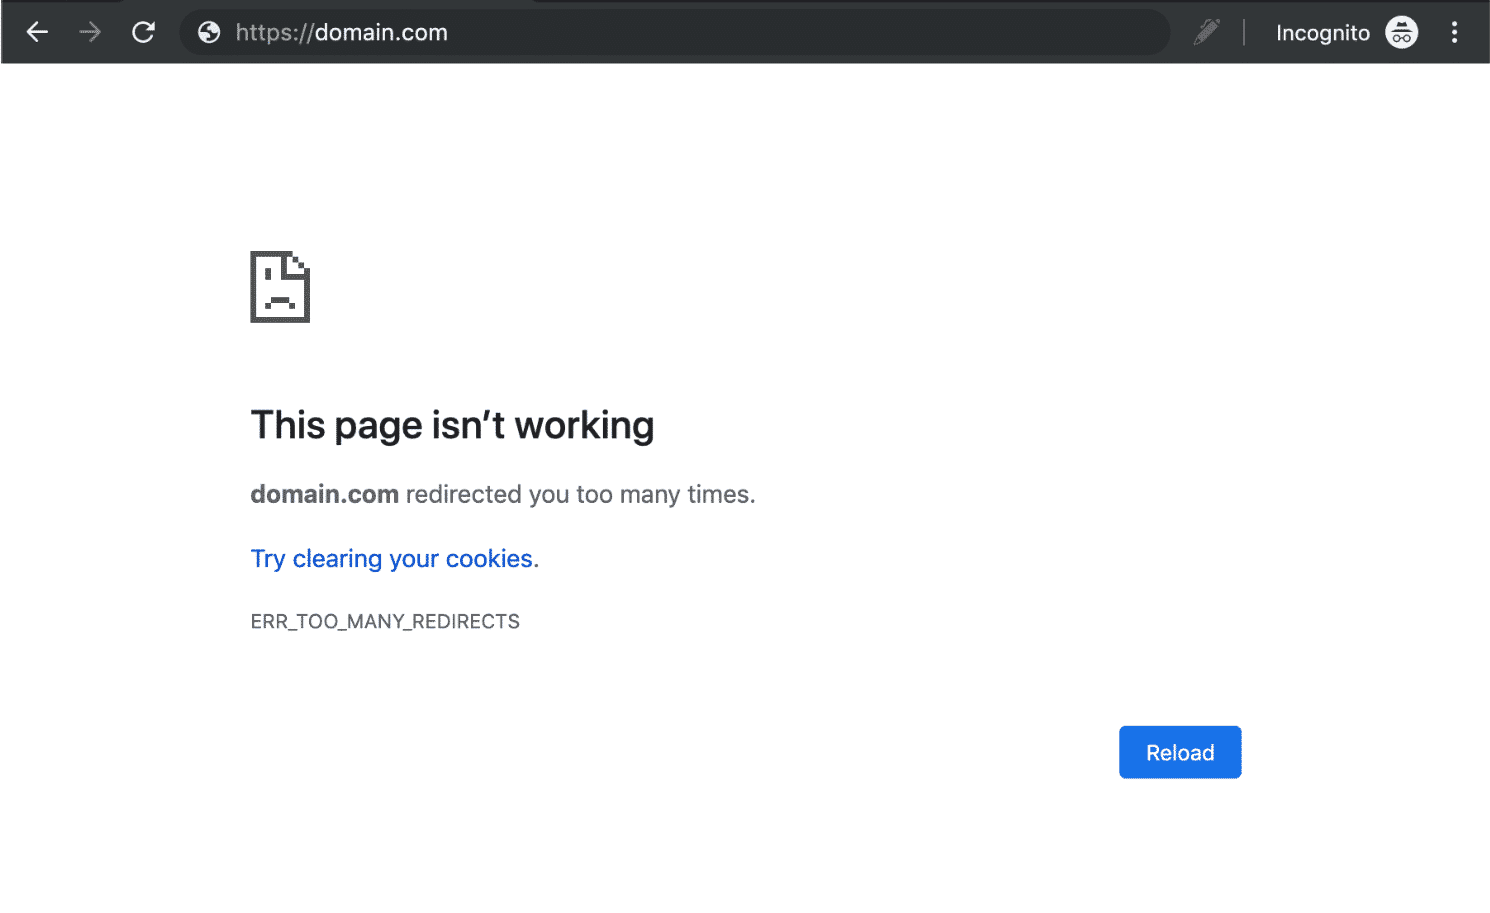 The Chrome ERR_TOO_MANY_REDIRECTS error message, with the text 